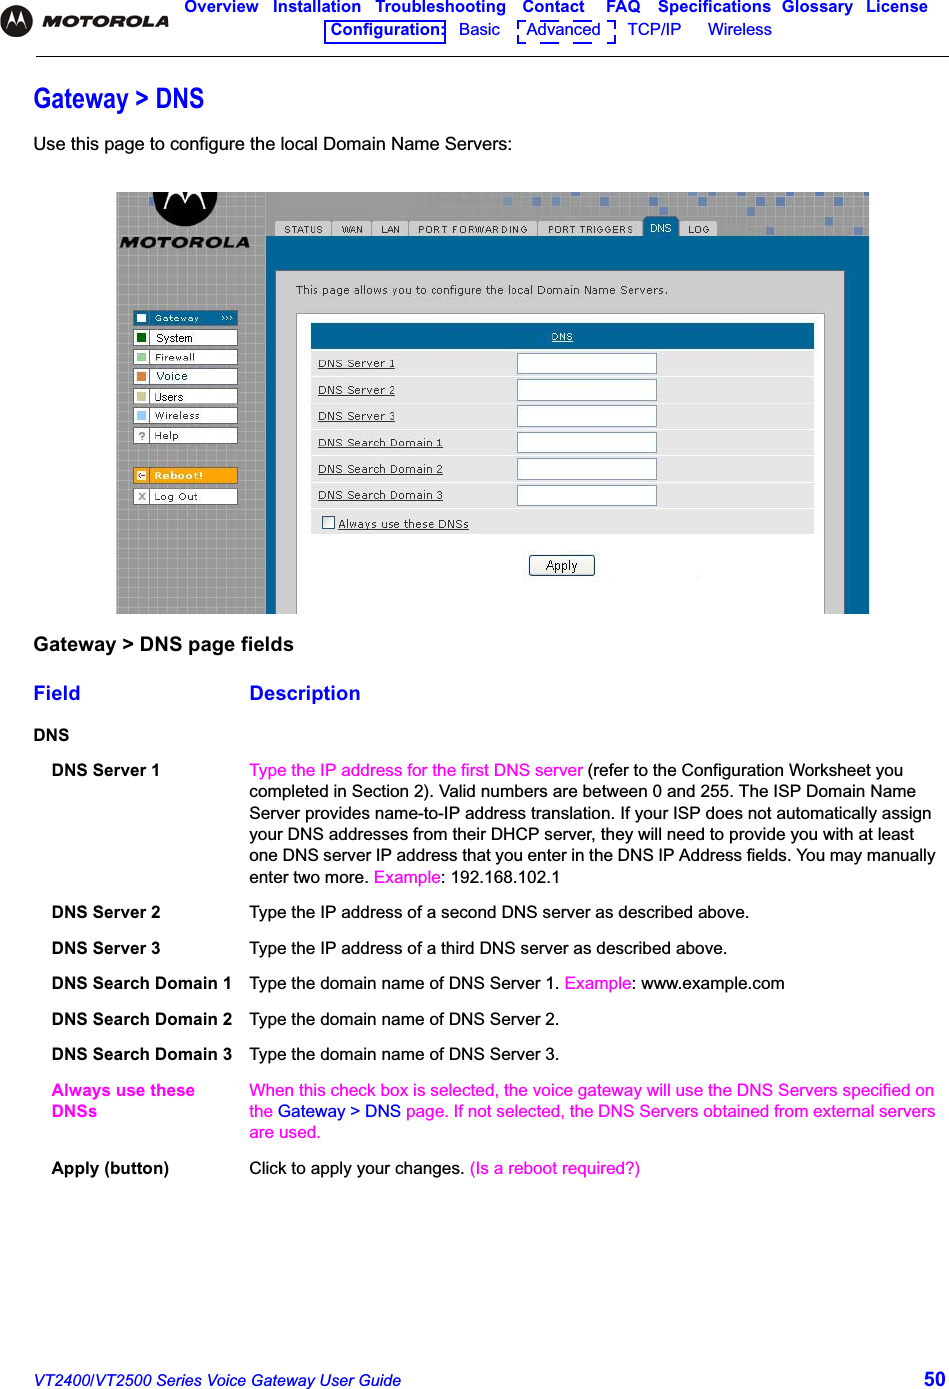 VT2400/VT2500 Series Voice Gateway User Guide 50Overview Installation Troubleshooting Contact FAQ Specifications Glossary LicenseConfiguration:   Basic      Advanced      TCP/IP      Wireless Gateway &gt; DNSUse this page to configure the local Domain Name Servers:Gateway &gt; DNS page fieldsField DescriptionDNSDNS Server 1 Type the IP address for the first DNS server (refer to the Configuration Worksheet you completed in Section 2). Valid numbers are between 0 and 255. The ISP Domain Name Server provides name-to-IP address translation. If your ISP does not automatically assign your DNS addresses from their DHCP server, they will need to provide you with at least one DNS server IP address that you enter in the DNS IP Address fields. You may manually enter two more. Example: 192.168.102.1DNS Server 2 Type the IP address of a second DNS server as described above. DNS Server 3 Type the IP address of a third DNS server as described above.DNS Search Domain 1 Type the domain name of DNS Server 1. Example: www.example.comDNS Search Domain 2 Type the domain name of DNS Server 2.DNS Search Domain 3 Type the domain name of DNS Server 3.Always use these DNSsWhen this check box is selected, the voice gateway will use the DNS Servers specified on the Gateway &gt; DNS page. If not selected, the DNS Servers obtained from external servers are used.Apply (button) Click to apply your changes. (Is a reboot required?)